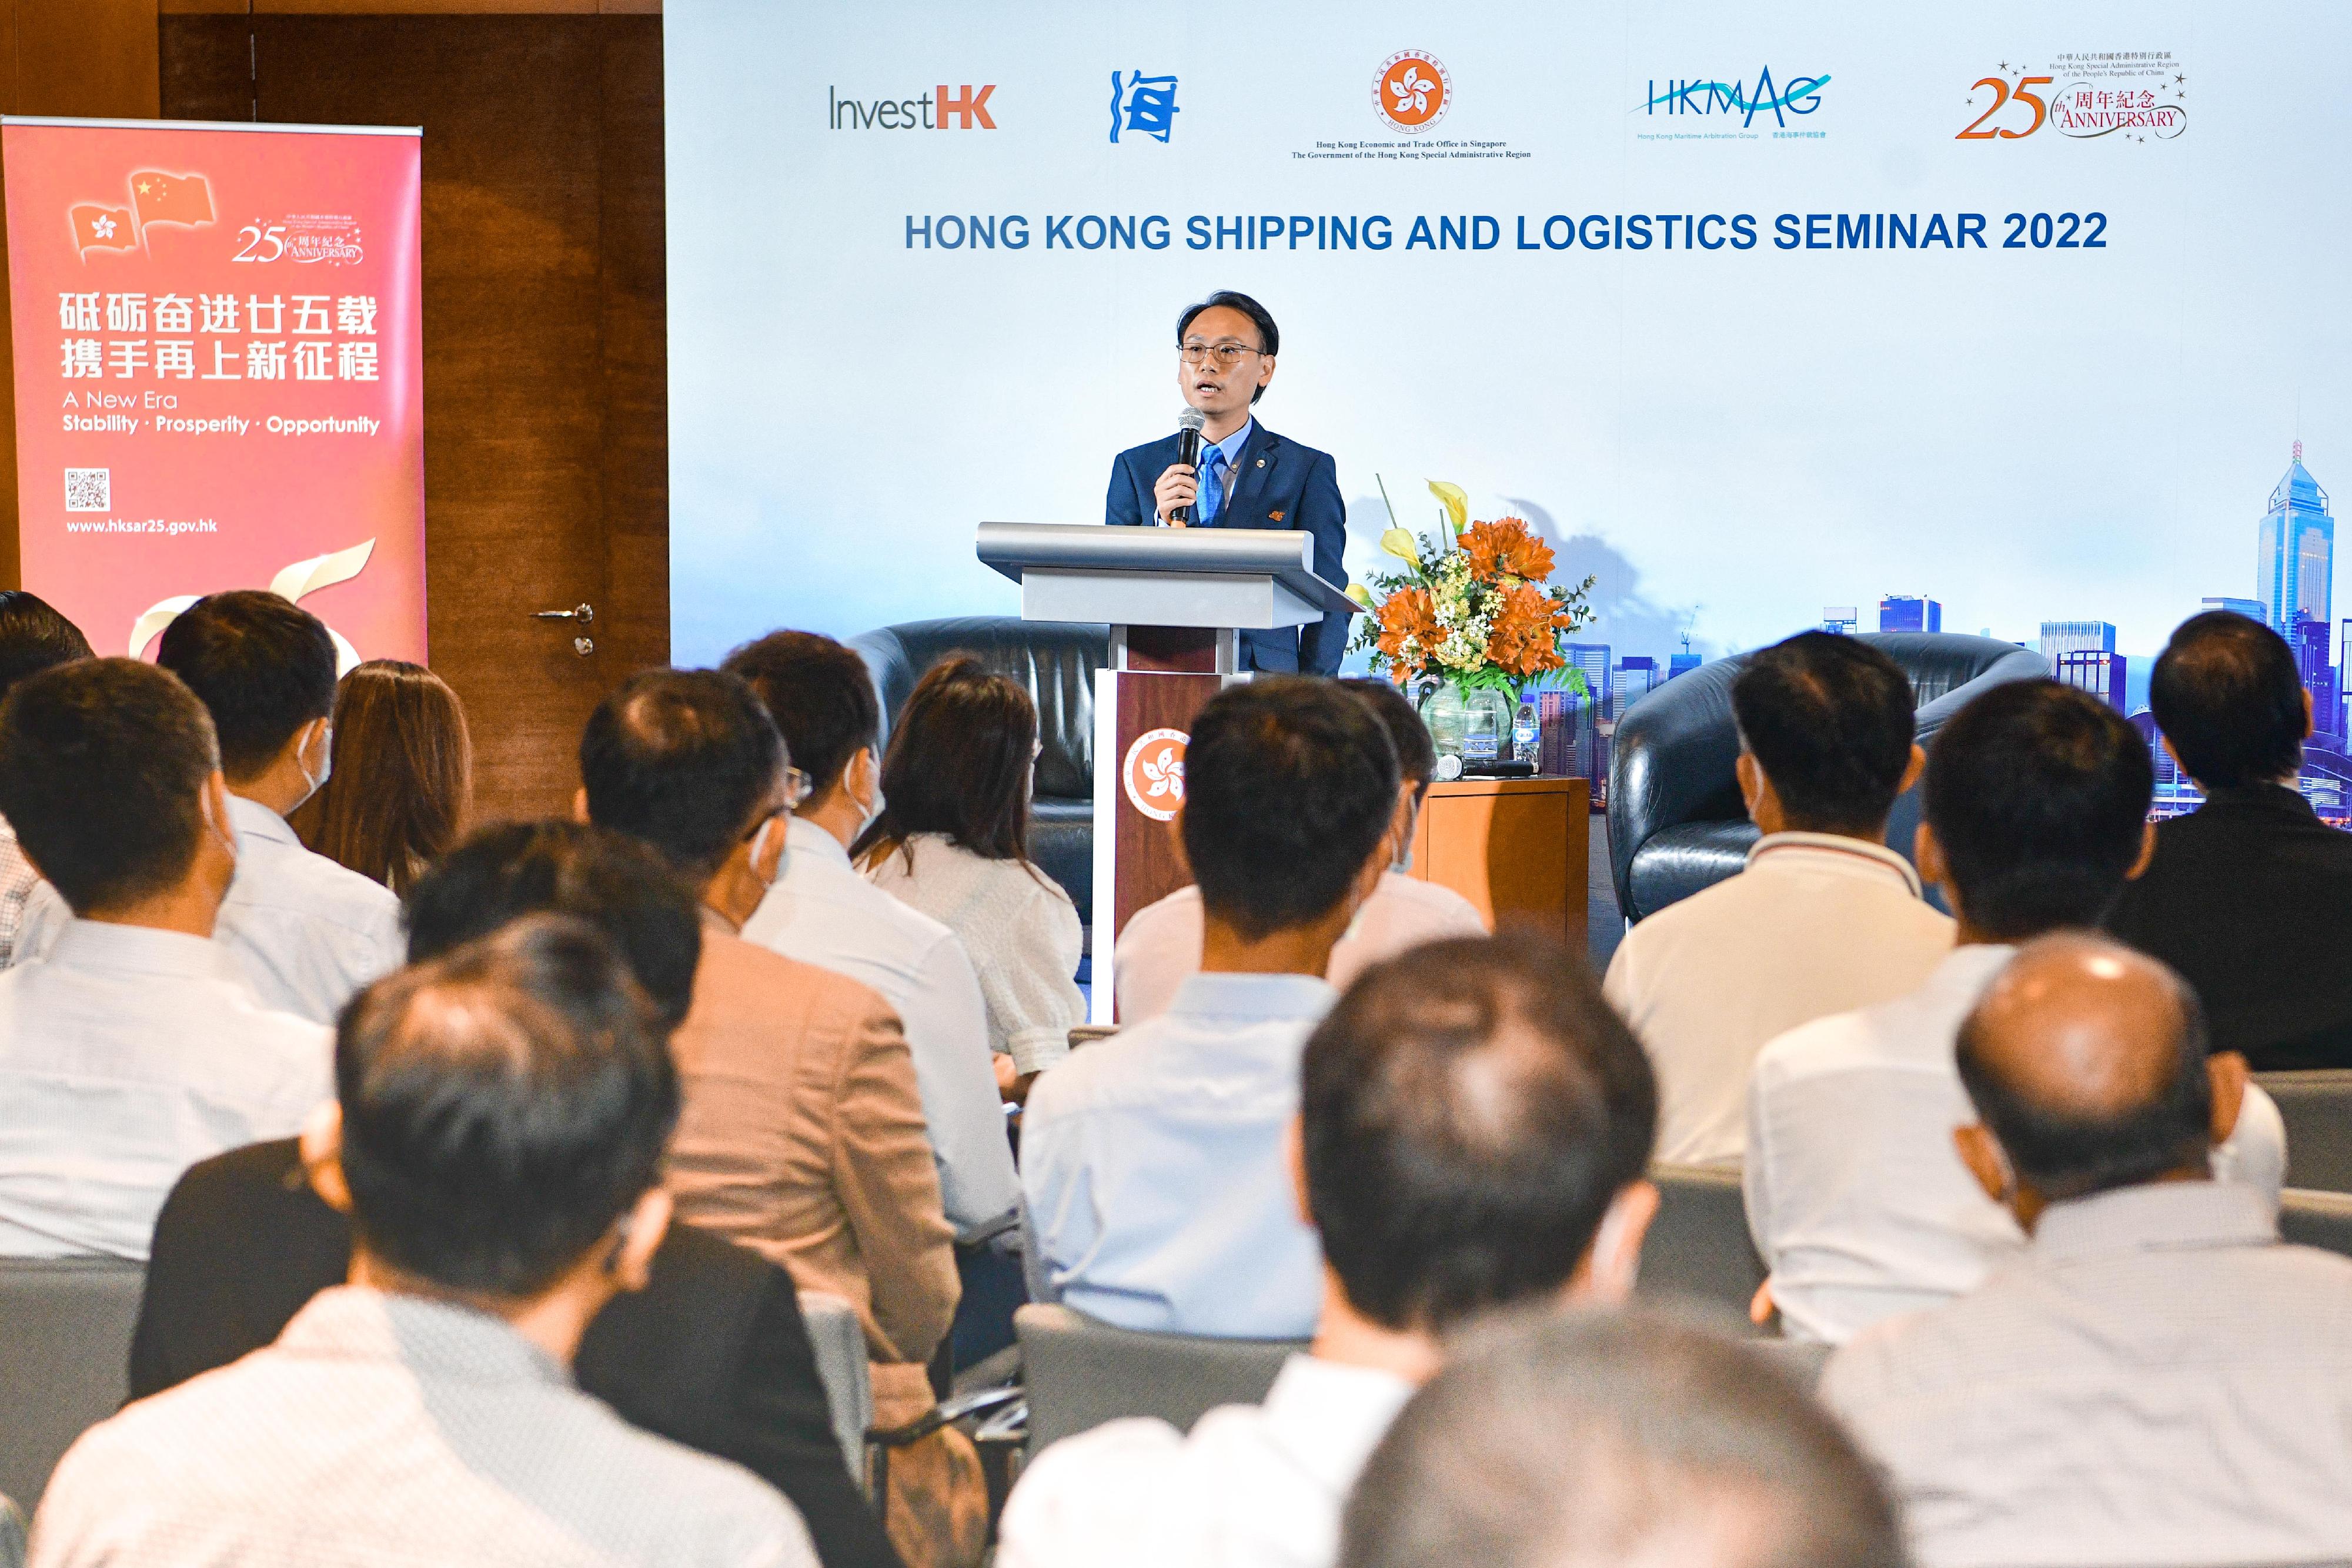 The Hong Kong Economic and Trade Office in Singapore held a business seminar today (August 18) entitled "Development of Hong Kong Shipping Registry and logistics opportunities associated with Greater Bay Area" to celebrate the 25th anniversary of the establishment of the Hong Kong Special Administrative Region. Photo shows the Regional Head (Singapore), Hong Kong Shipping Registry (HKSR), Marine Department, Mr Philip Ho, speaking about the support rendered by the HKSR for owners of Hong Kong-registered ships residing in Singapore, Malaysia, Vietnam, Indonesia and India.